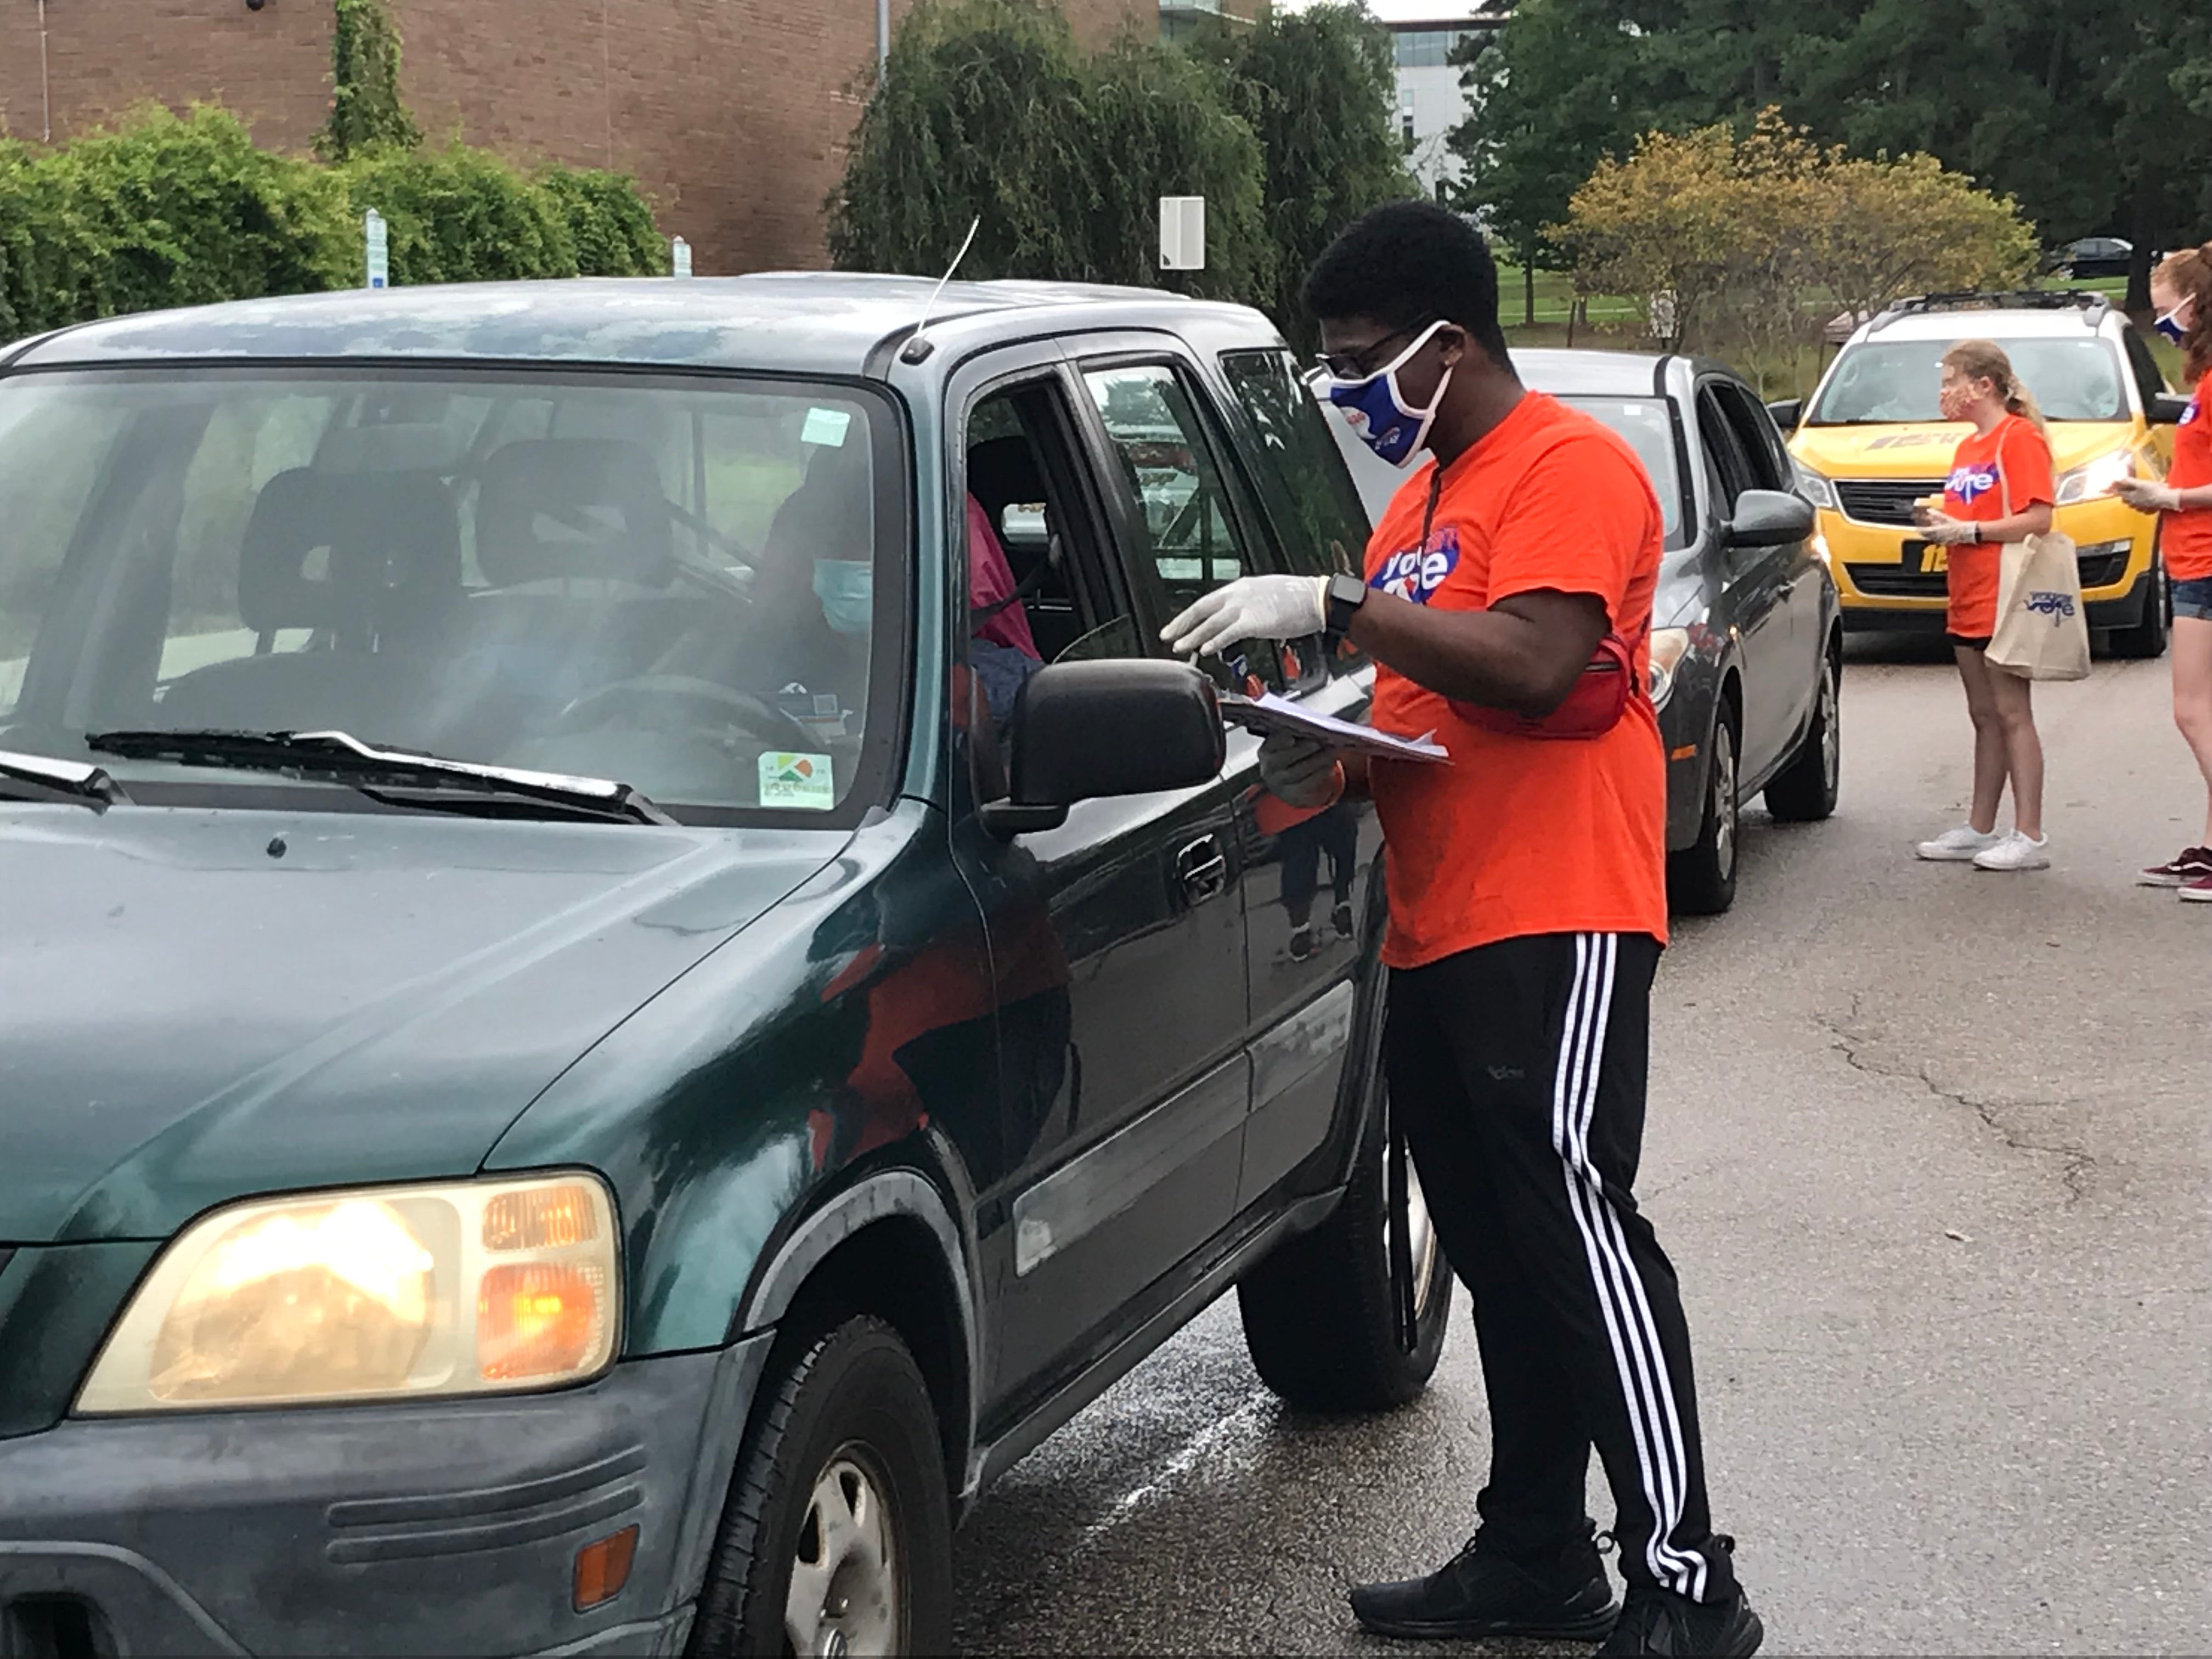 Voter registration drive, with volunteer standing alongside a car with clipboard, helping individual register to vote